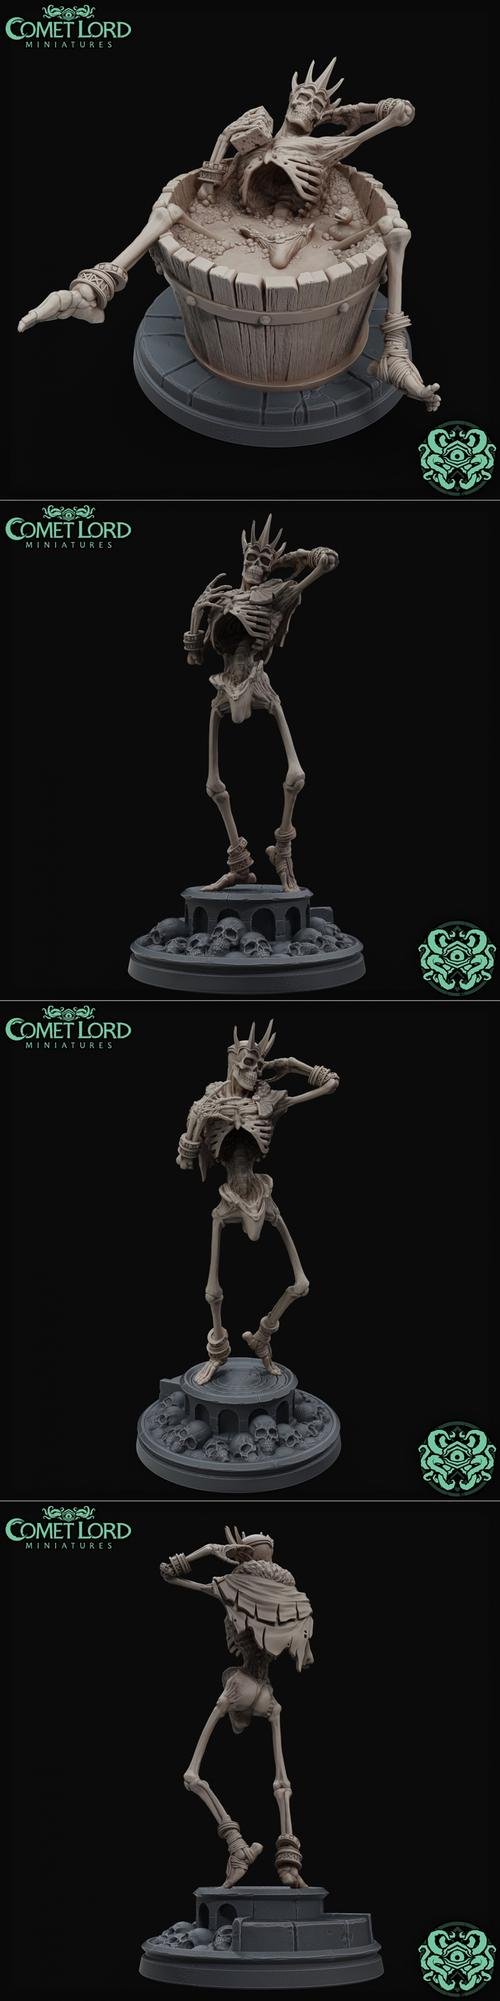 Comet Lord Miniatures - Stupid Sexy Lich 3D Print